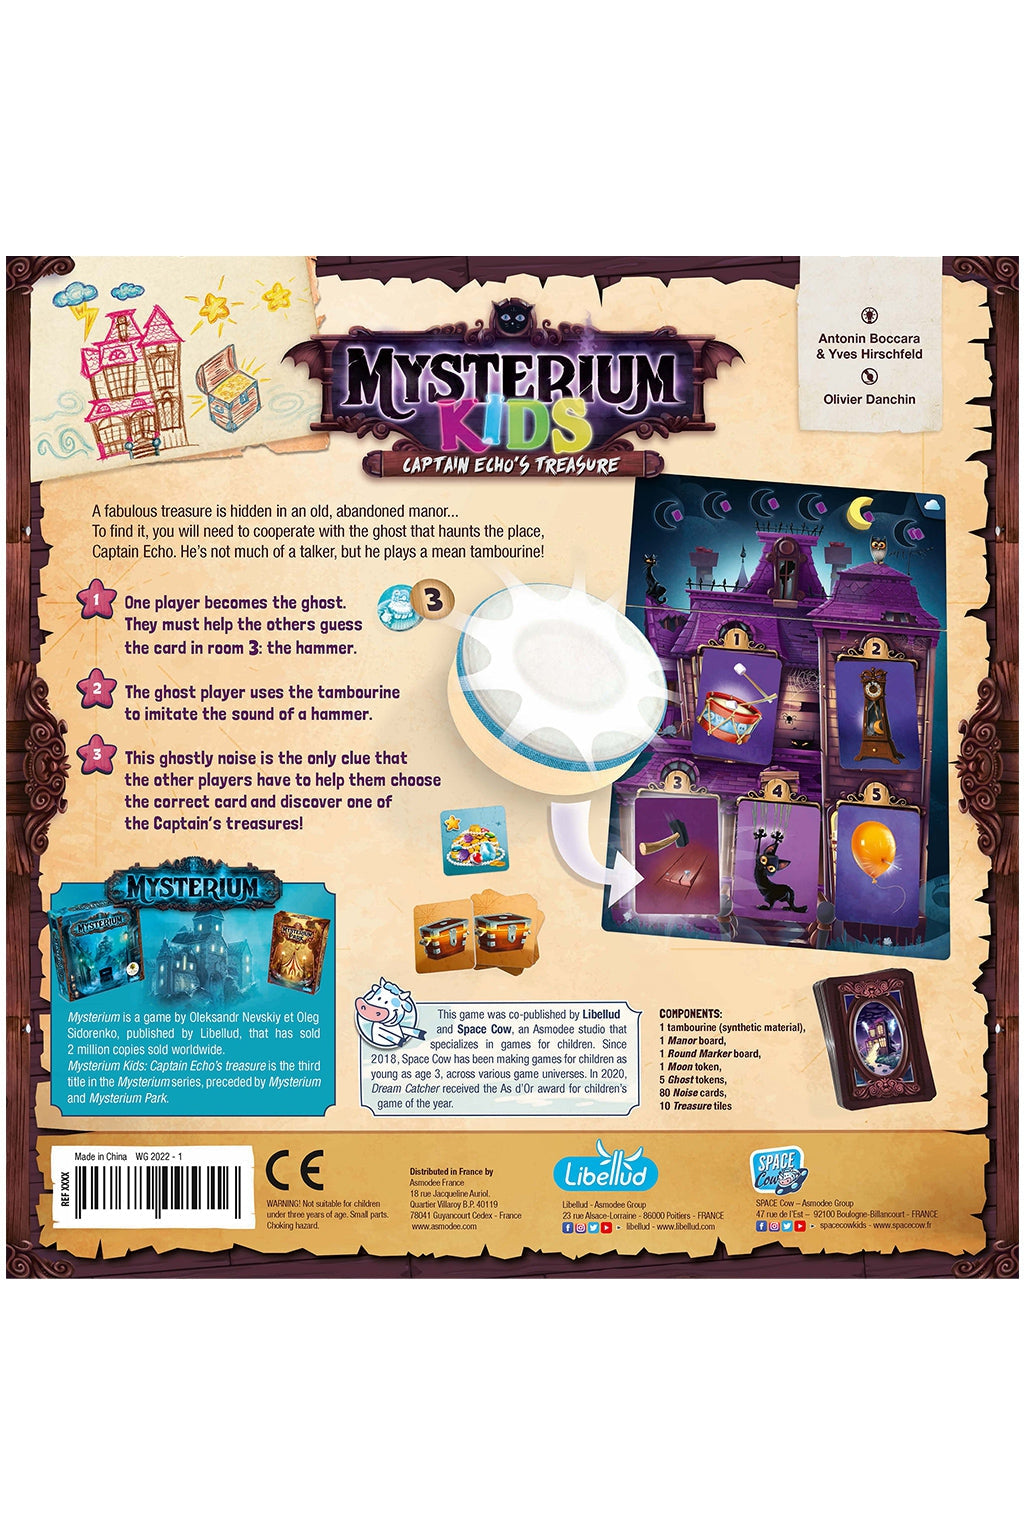 Mysterium Cooperative Board Game for Ages 10 and up, from Asmodee